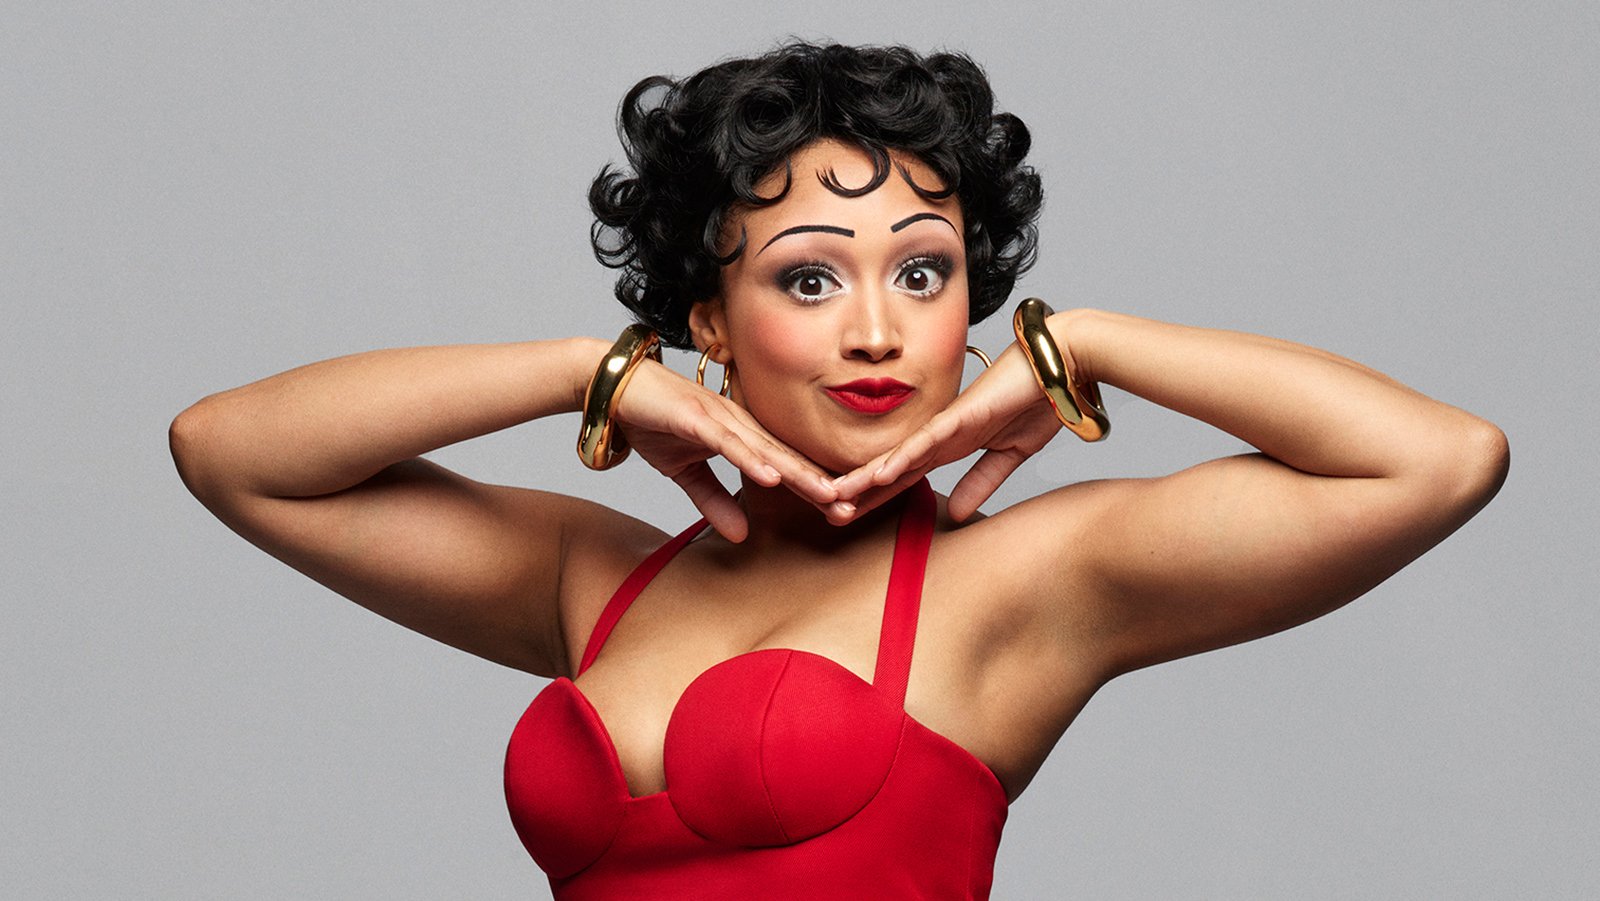 With Broadway Hopes, New Betty Boop Stage Musical Premiering in Chicago  Announces Star, Chicago News